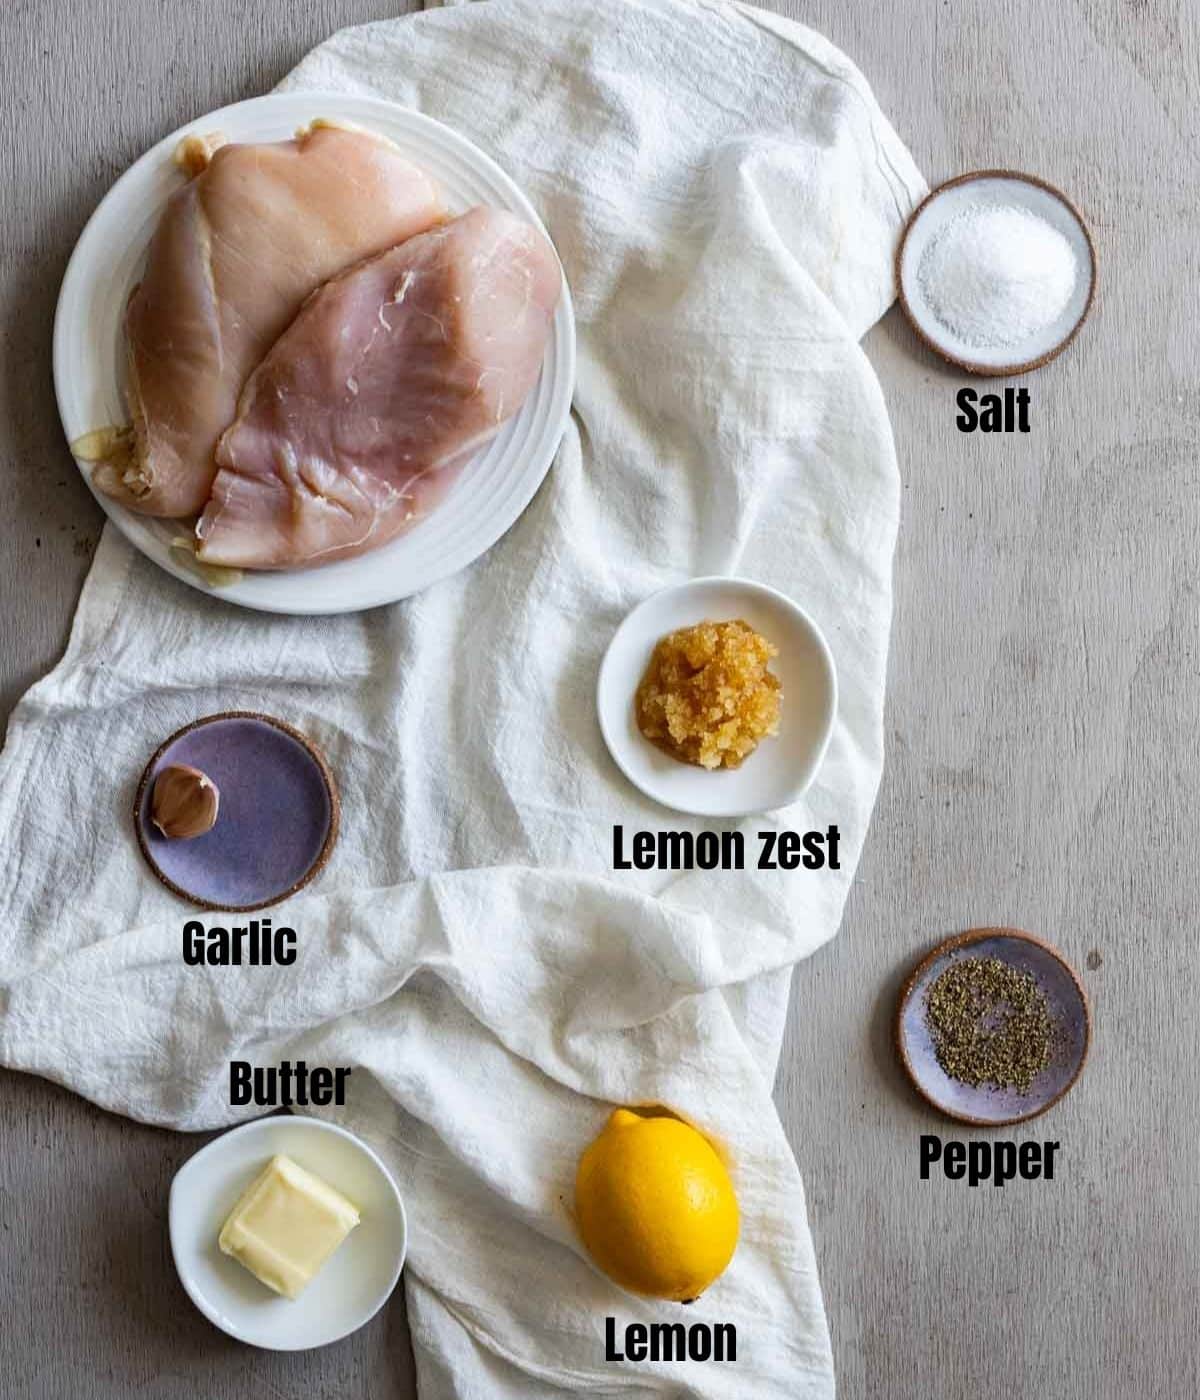 Ingredients to make sous vide frozen chicken breast arranged individually and labeled.